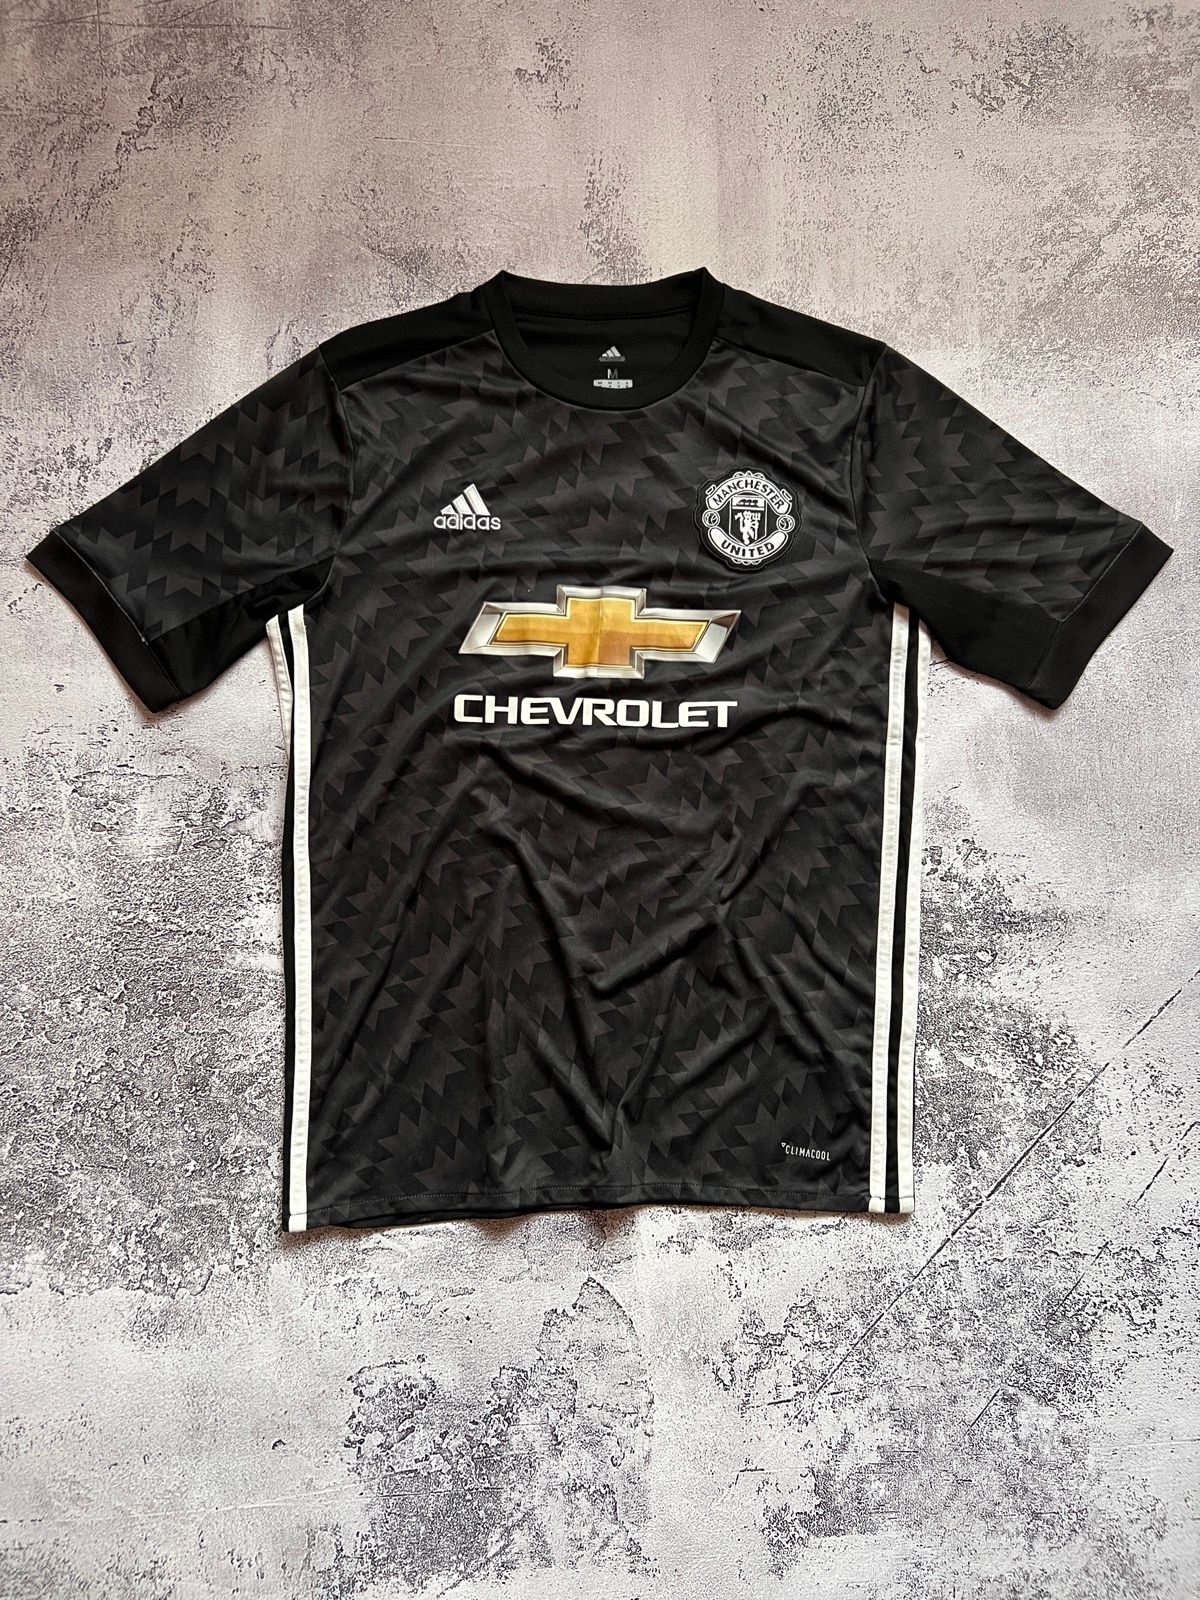 Pre-owned Adidas X Manchester United 2017 Manchester United Adidas Soccer Football Jersey In Black